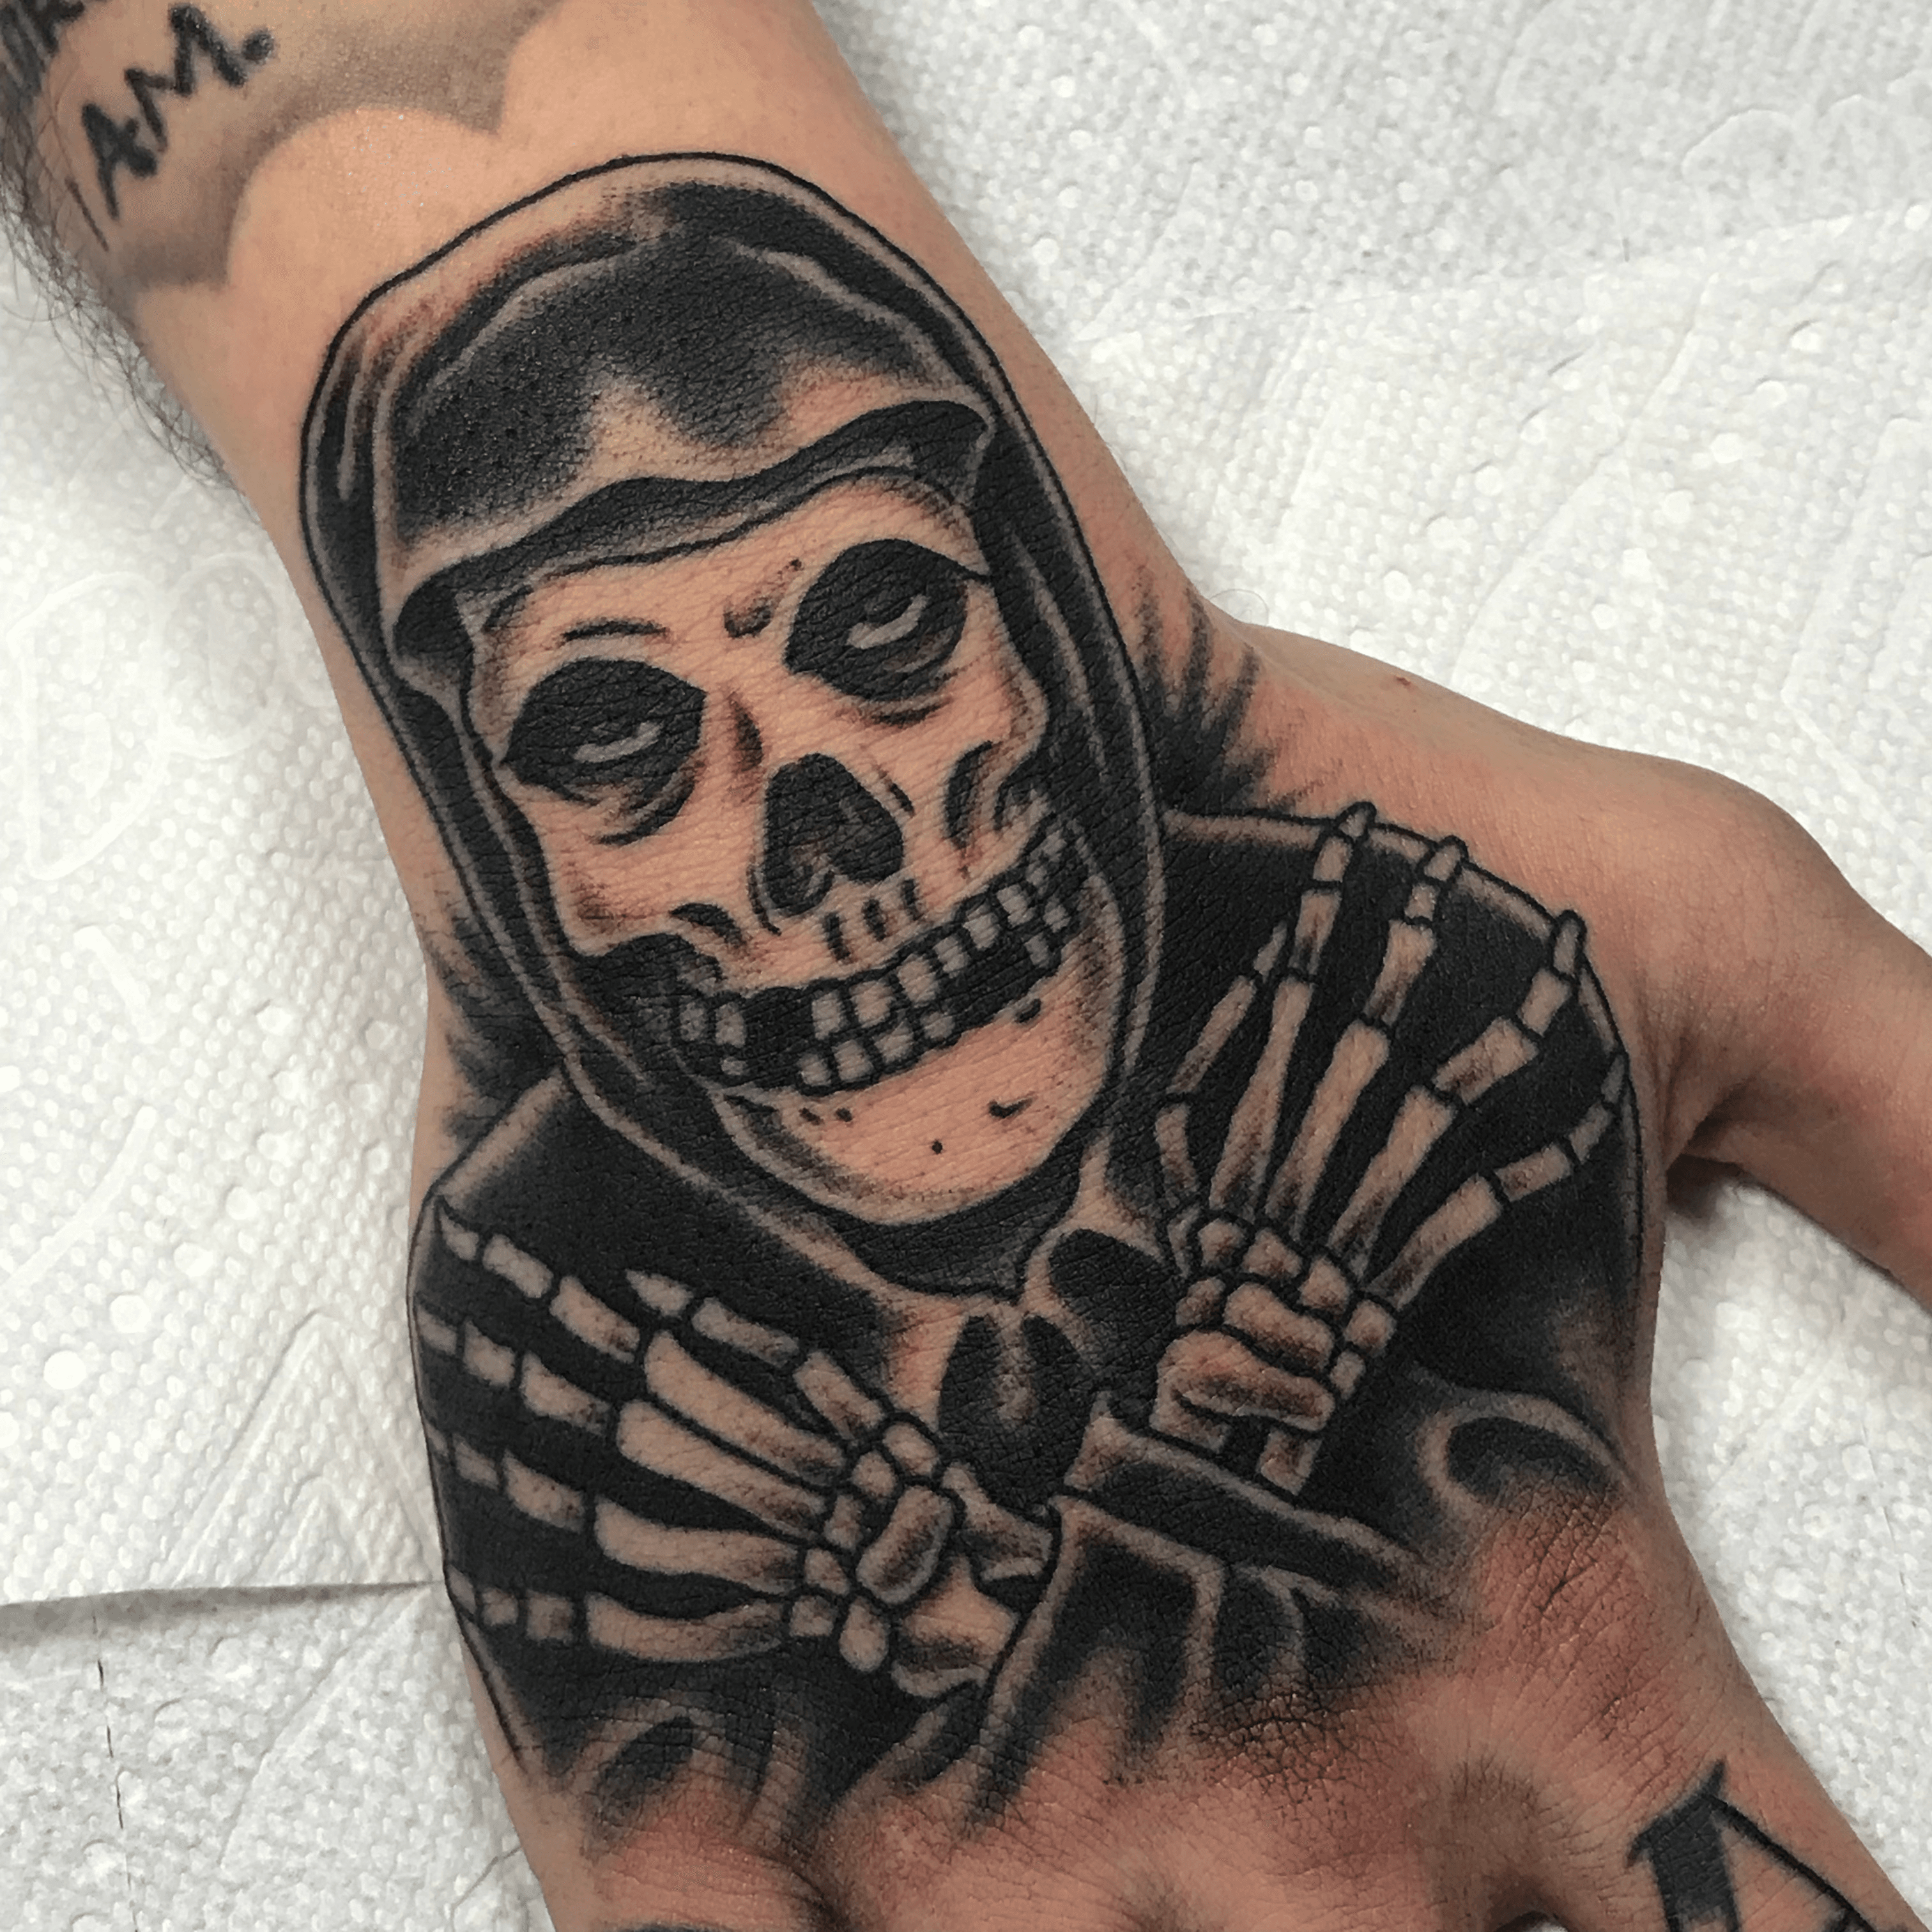 Tattoo uploaded by Sarah Calavera  Nice colors and shading in this more  realistic version of the Crimson Ghost Tattoo by Cody Holyoak TheMisfits  punk crimsonghost horror classicmovie band skull fiendclub  colorrealism 